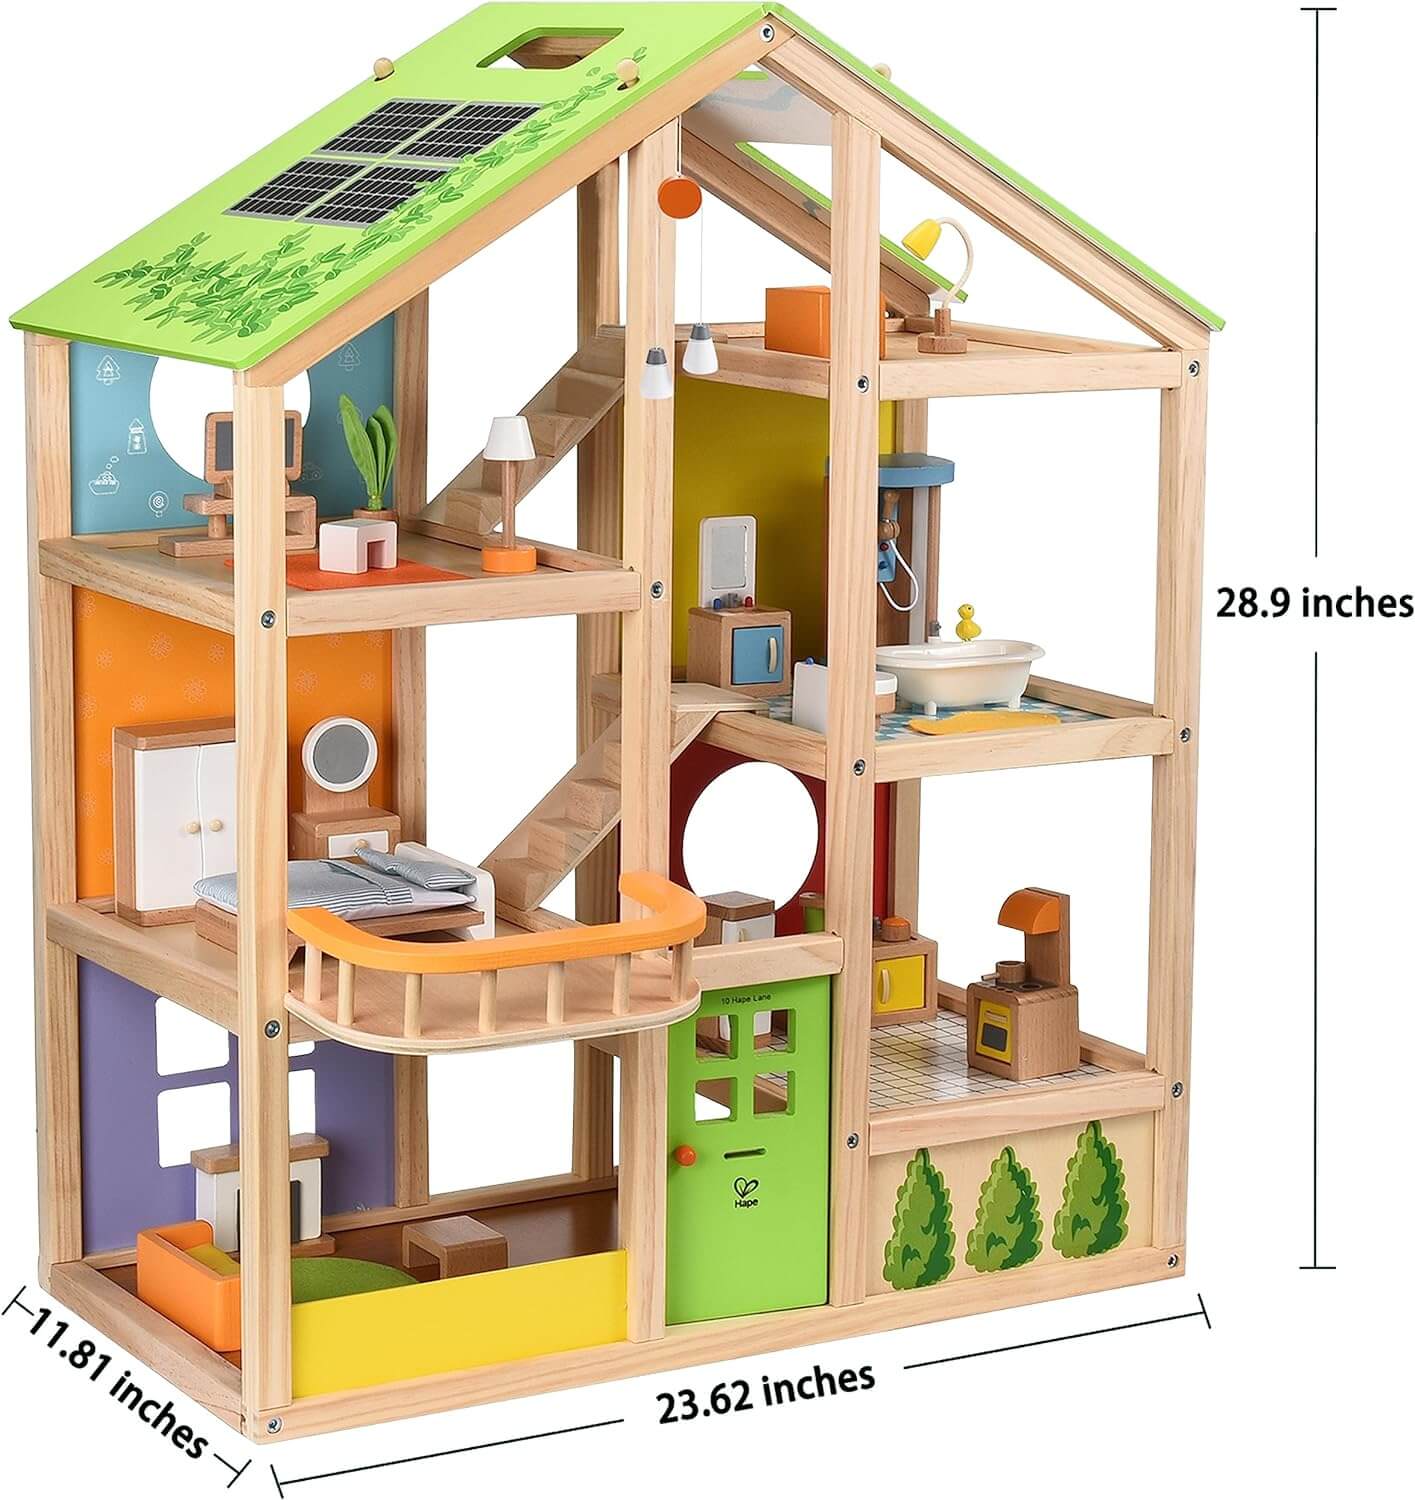 All Season Doll House Fully Furnished Hape